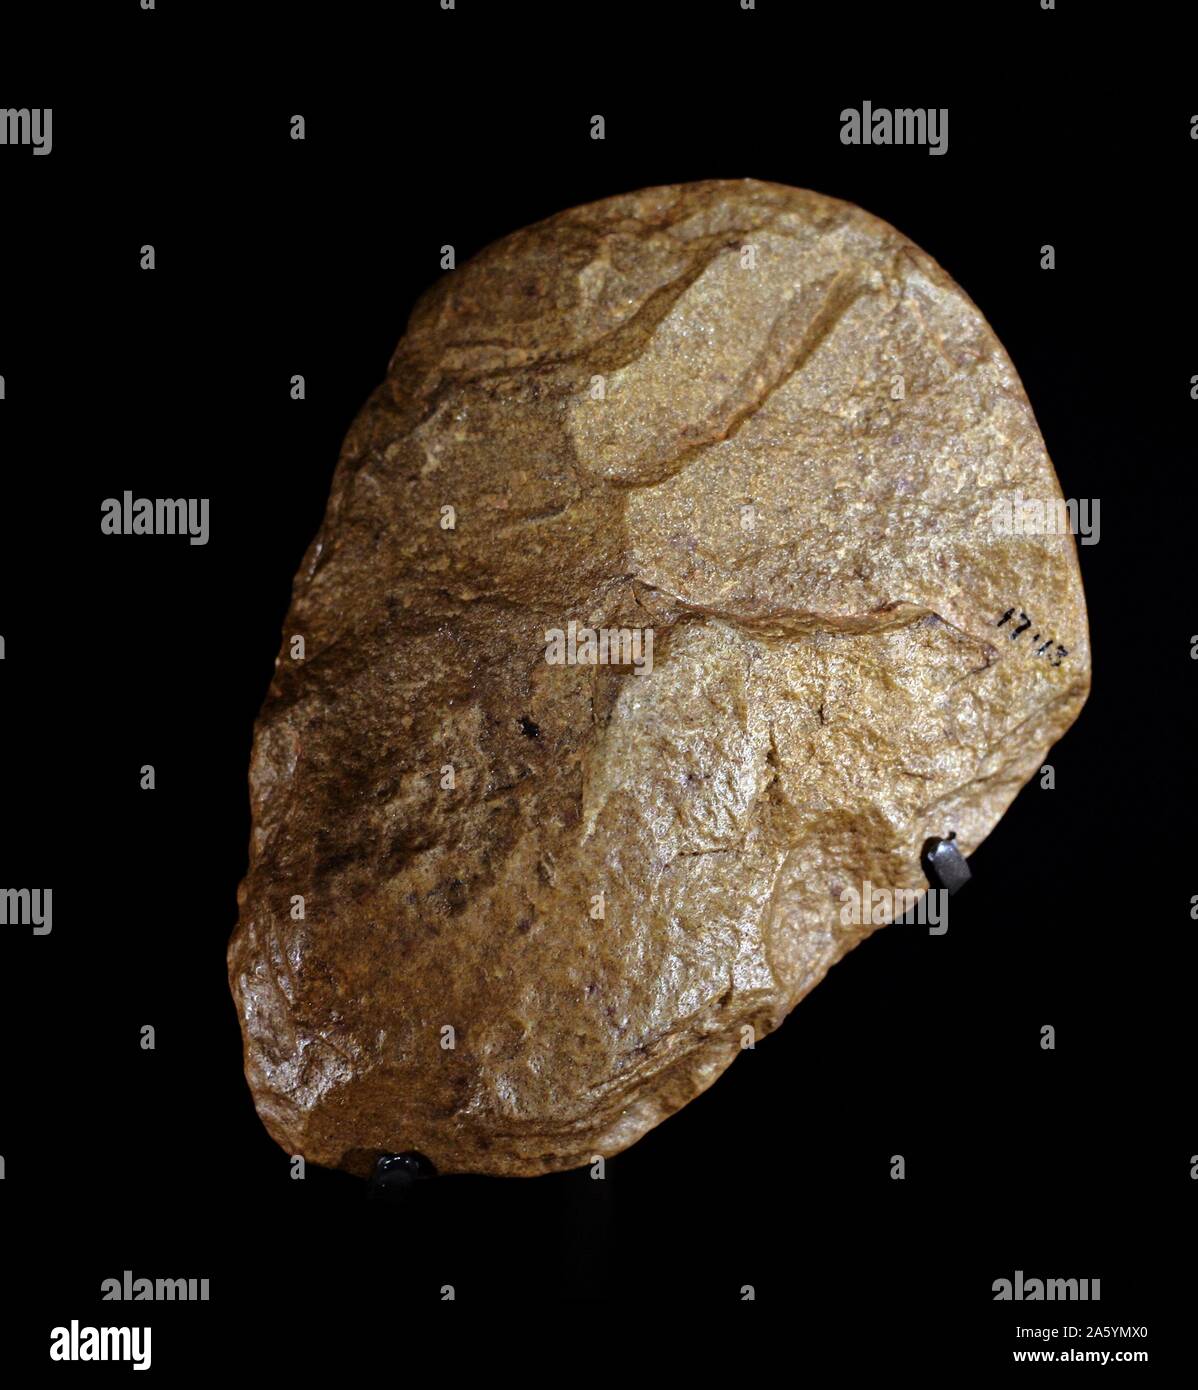 Stone Age hand-axe, made over 250,000 years ago. Found in Saltley, Birmingham. Would've been used to cut meat by Hunter Gatherers. Stock Photo